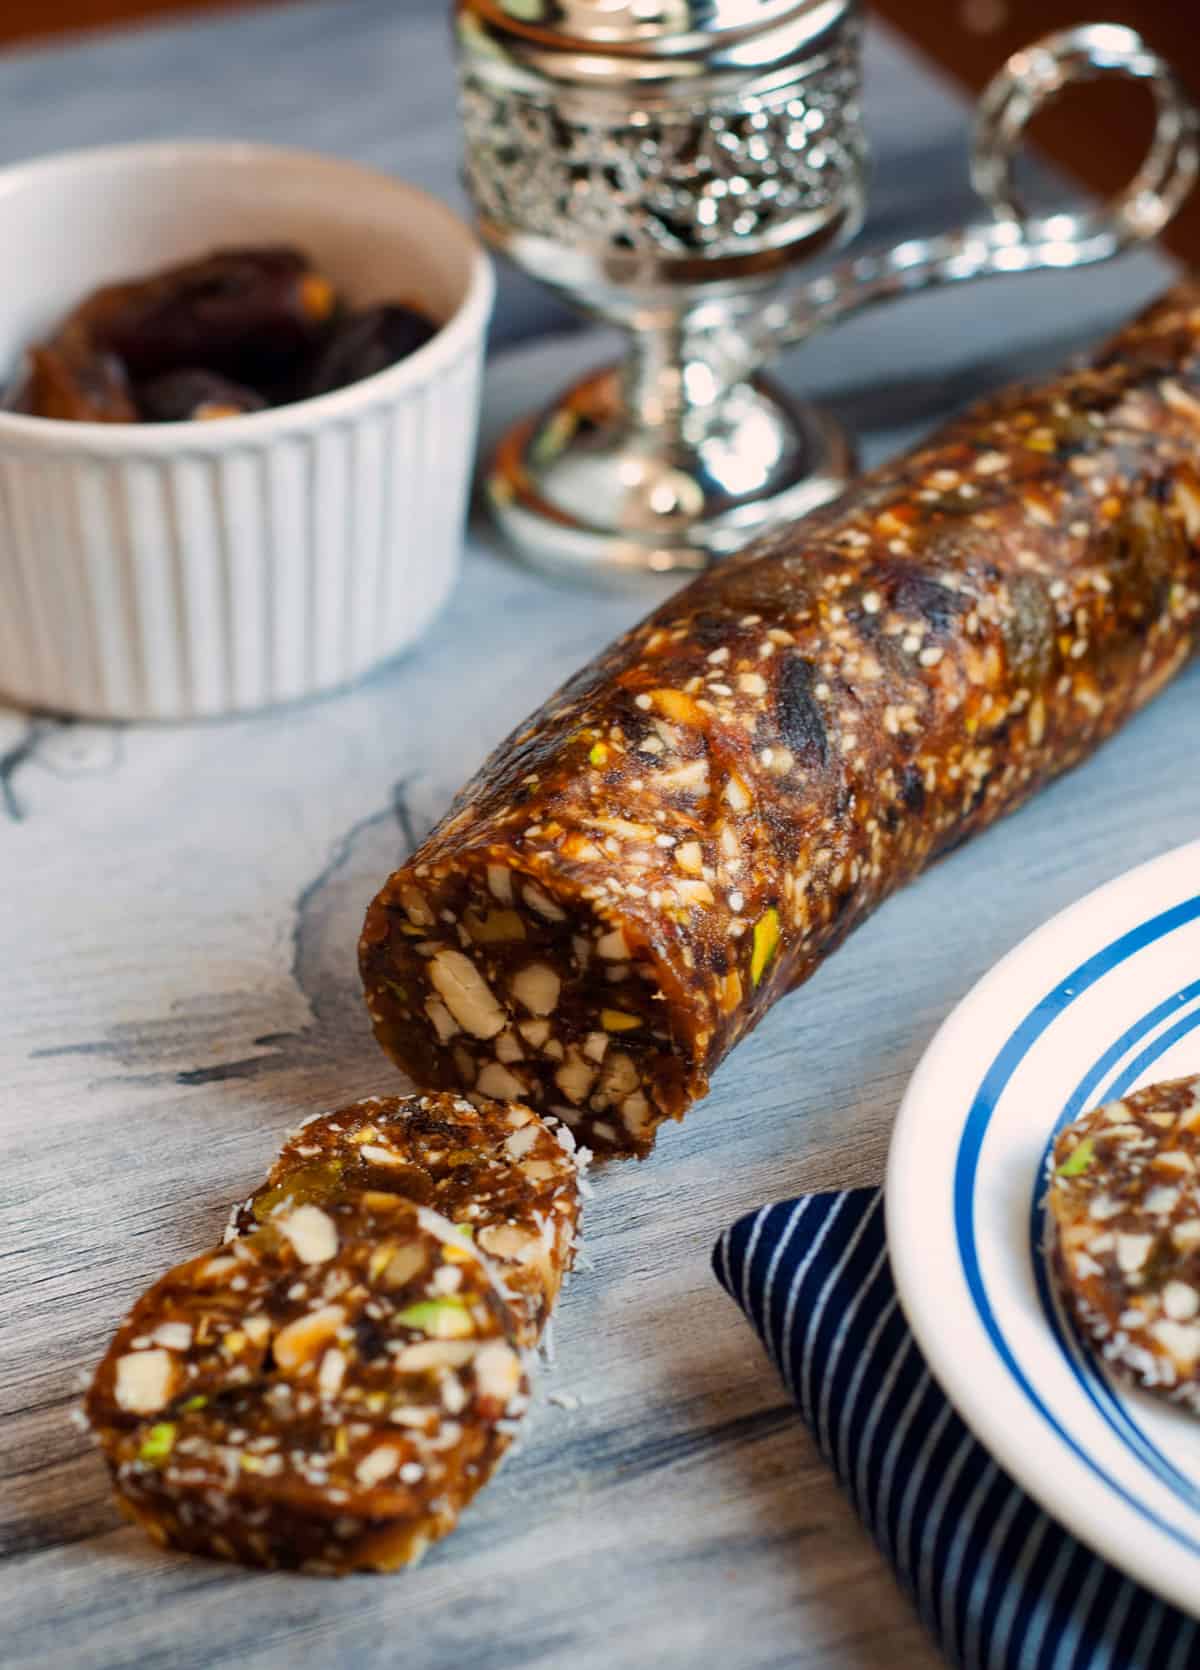 Date roll and slices with dates in the background.